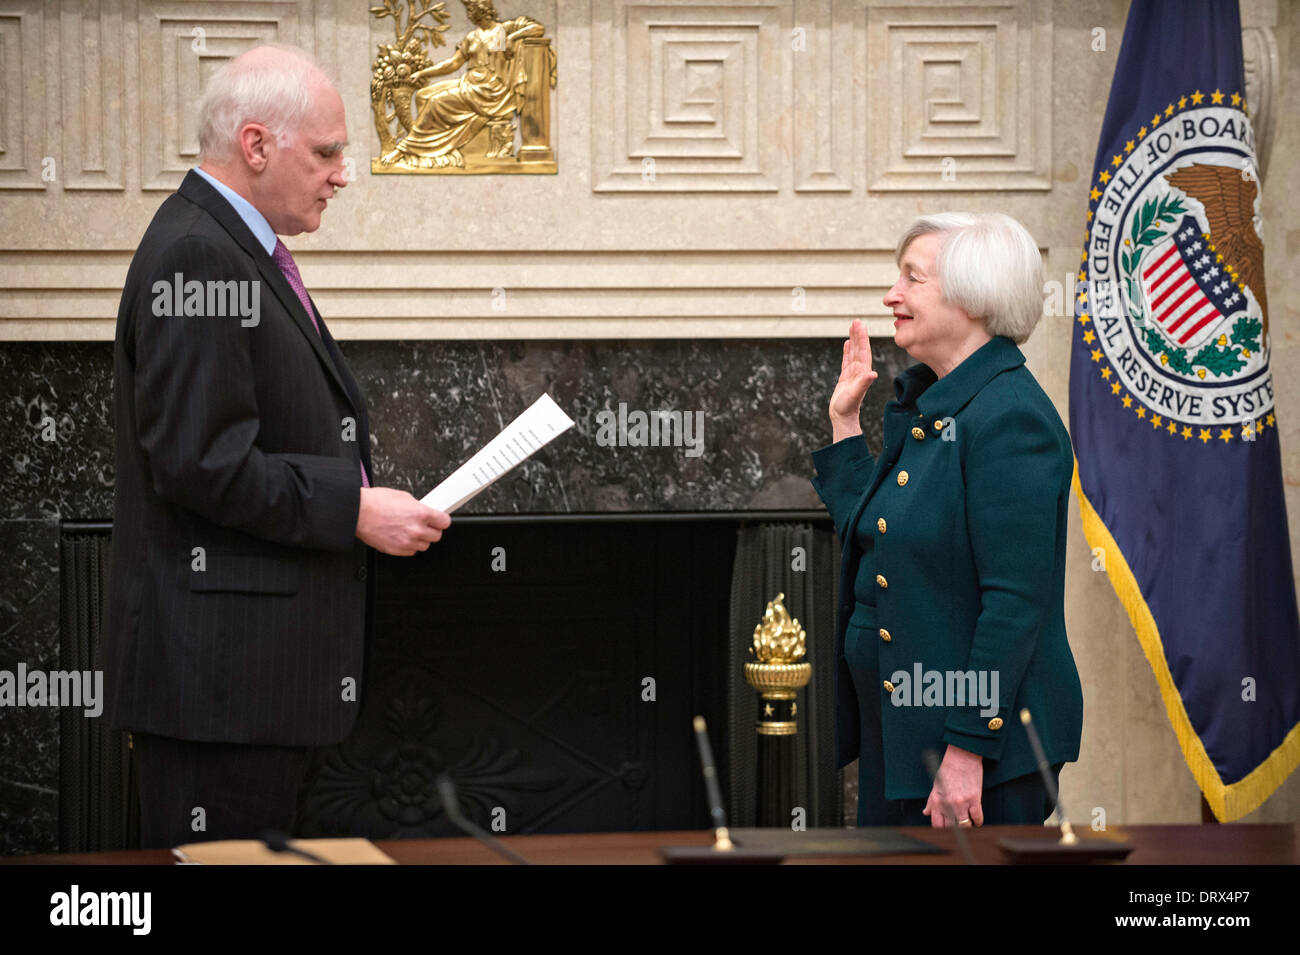 Janet Yellen takes the oath of office to become Chair of the Board of Governors of the Federal Reserve System at the Marriner S. Eccles Federal Reserve Board Building from Governor Daniel K. Tarullo February 3, 2014 in Washington, DC. Yellen replaces Ben Bernanke and is the first woman to hold the post. Stock Photo